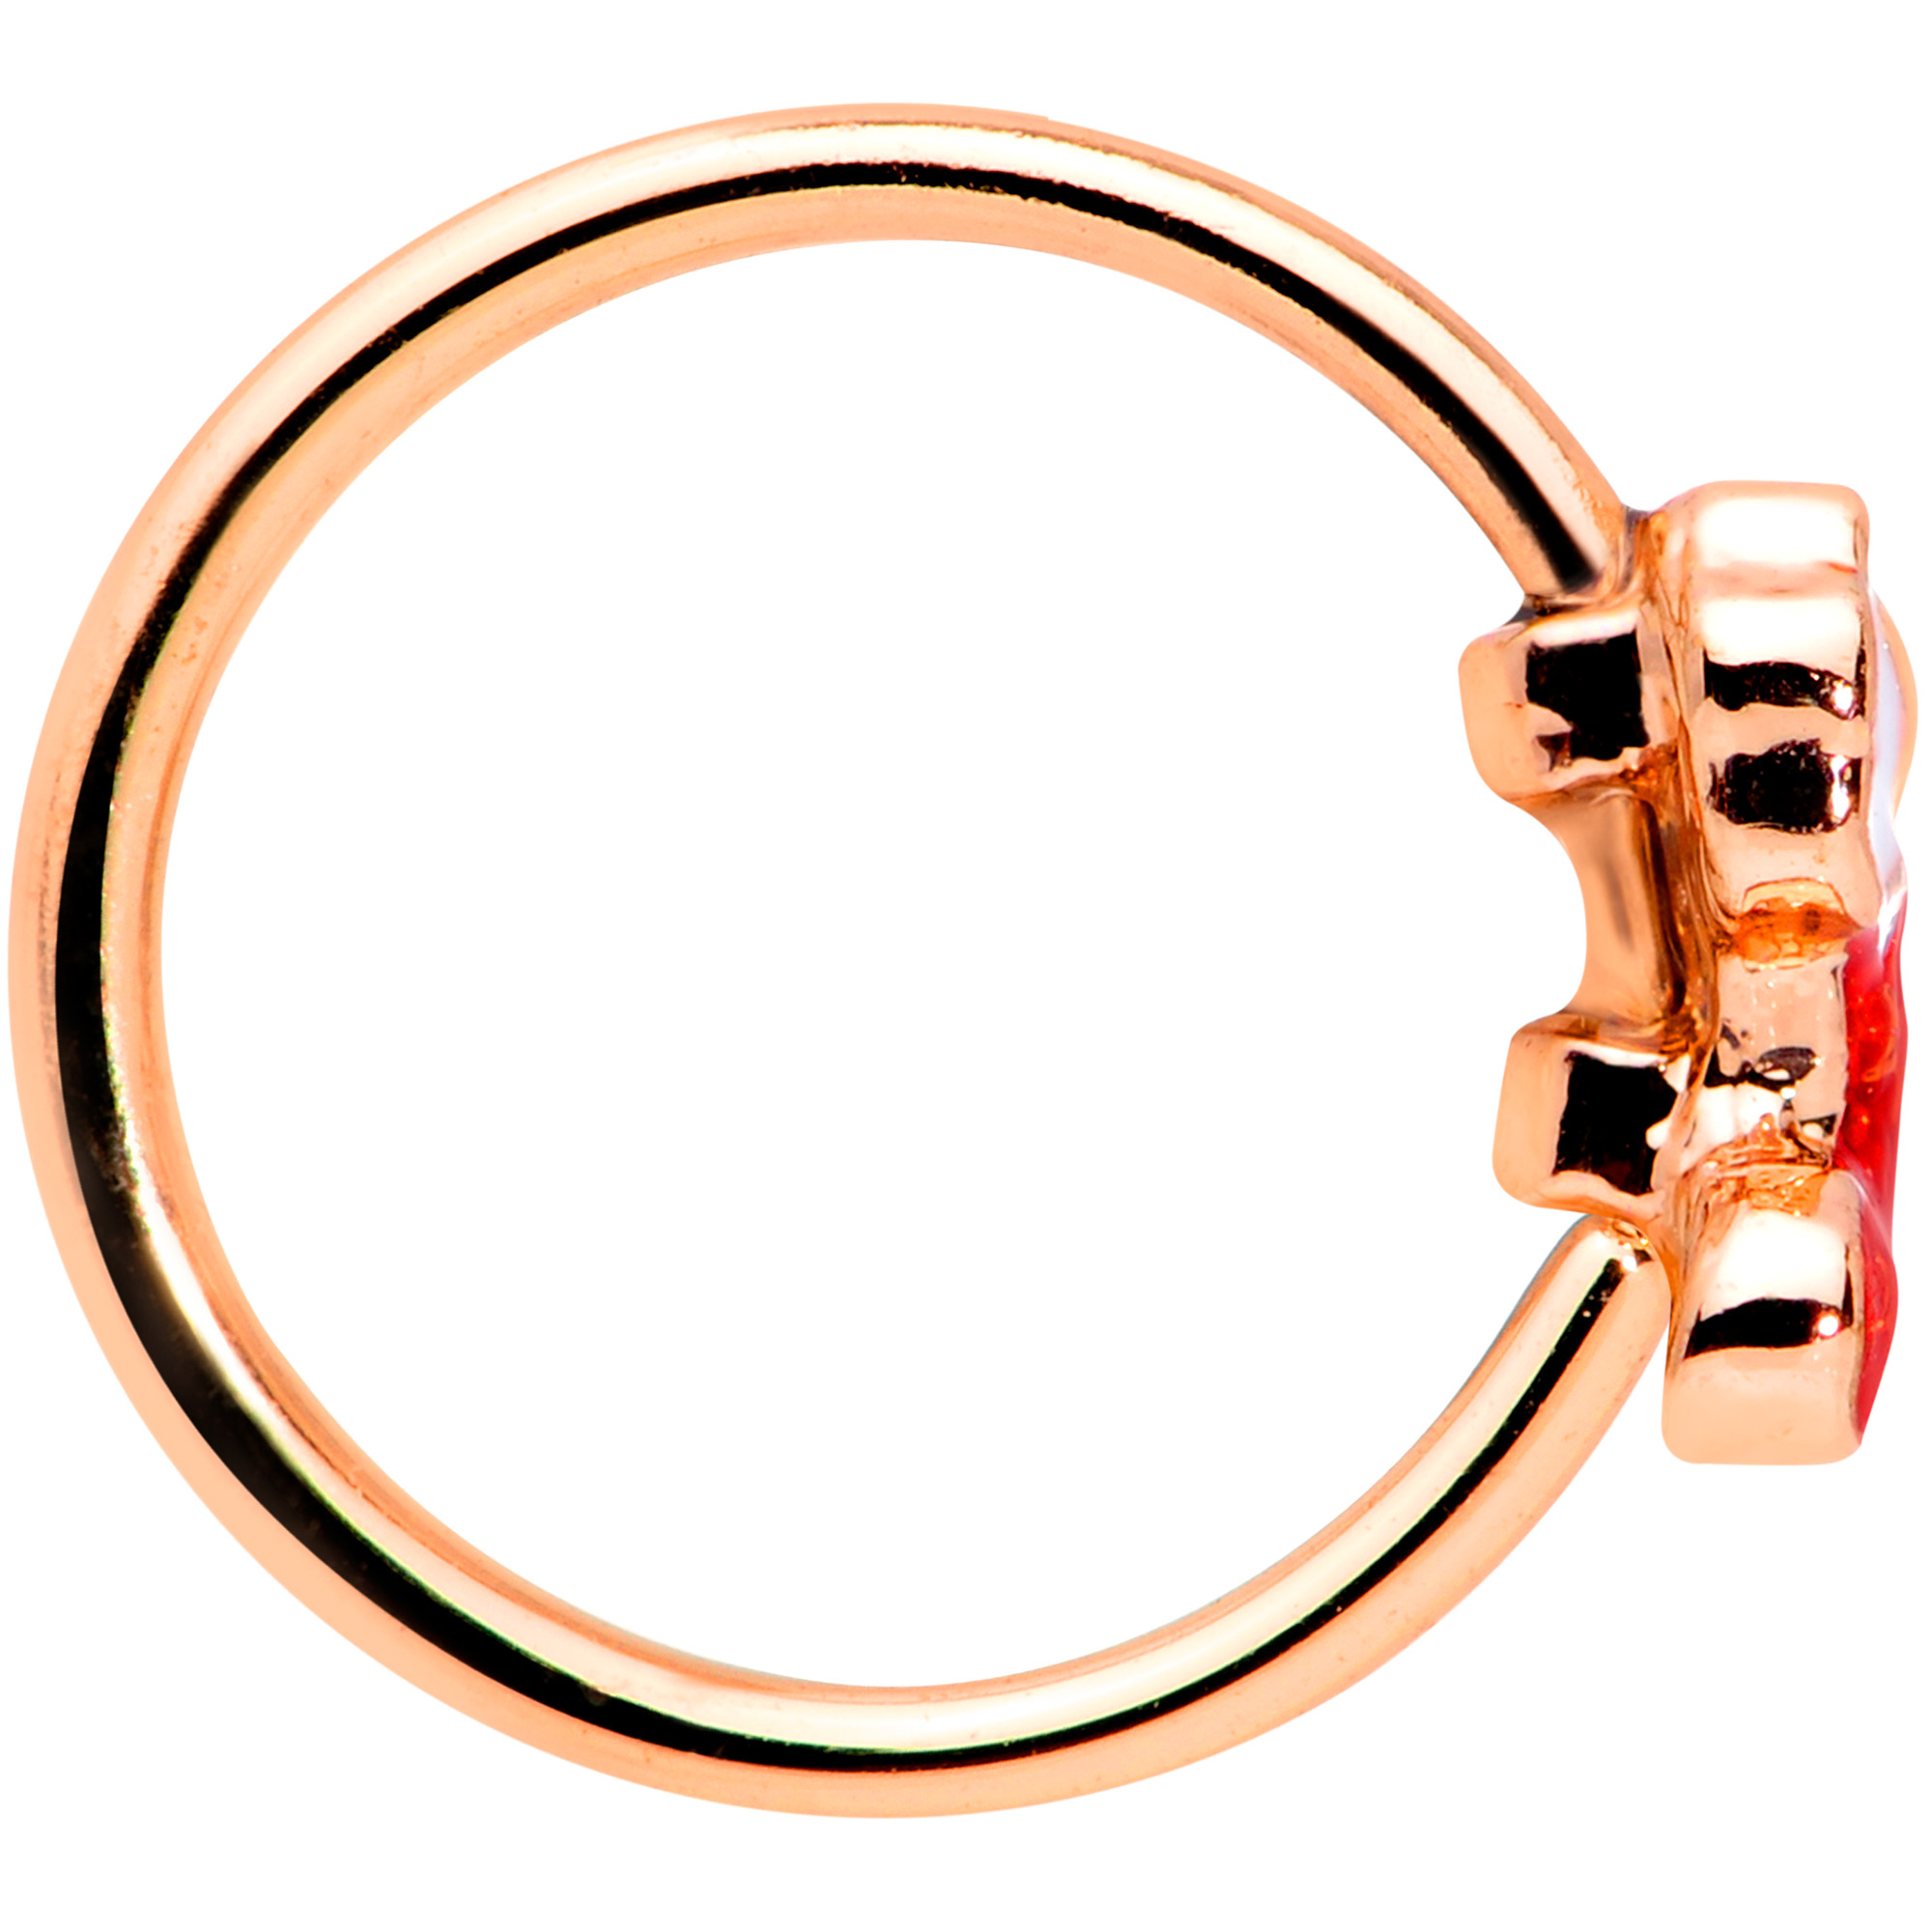 Body Candy Womens 20G PVD 316L Steel Nose Ring Rosy Red Stocking Nose Hoop Ring Circular Nose Ring 5/16” - image 3 of 3